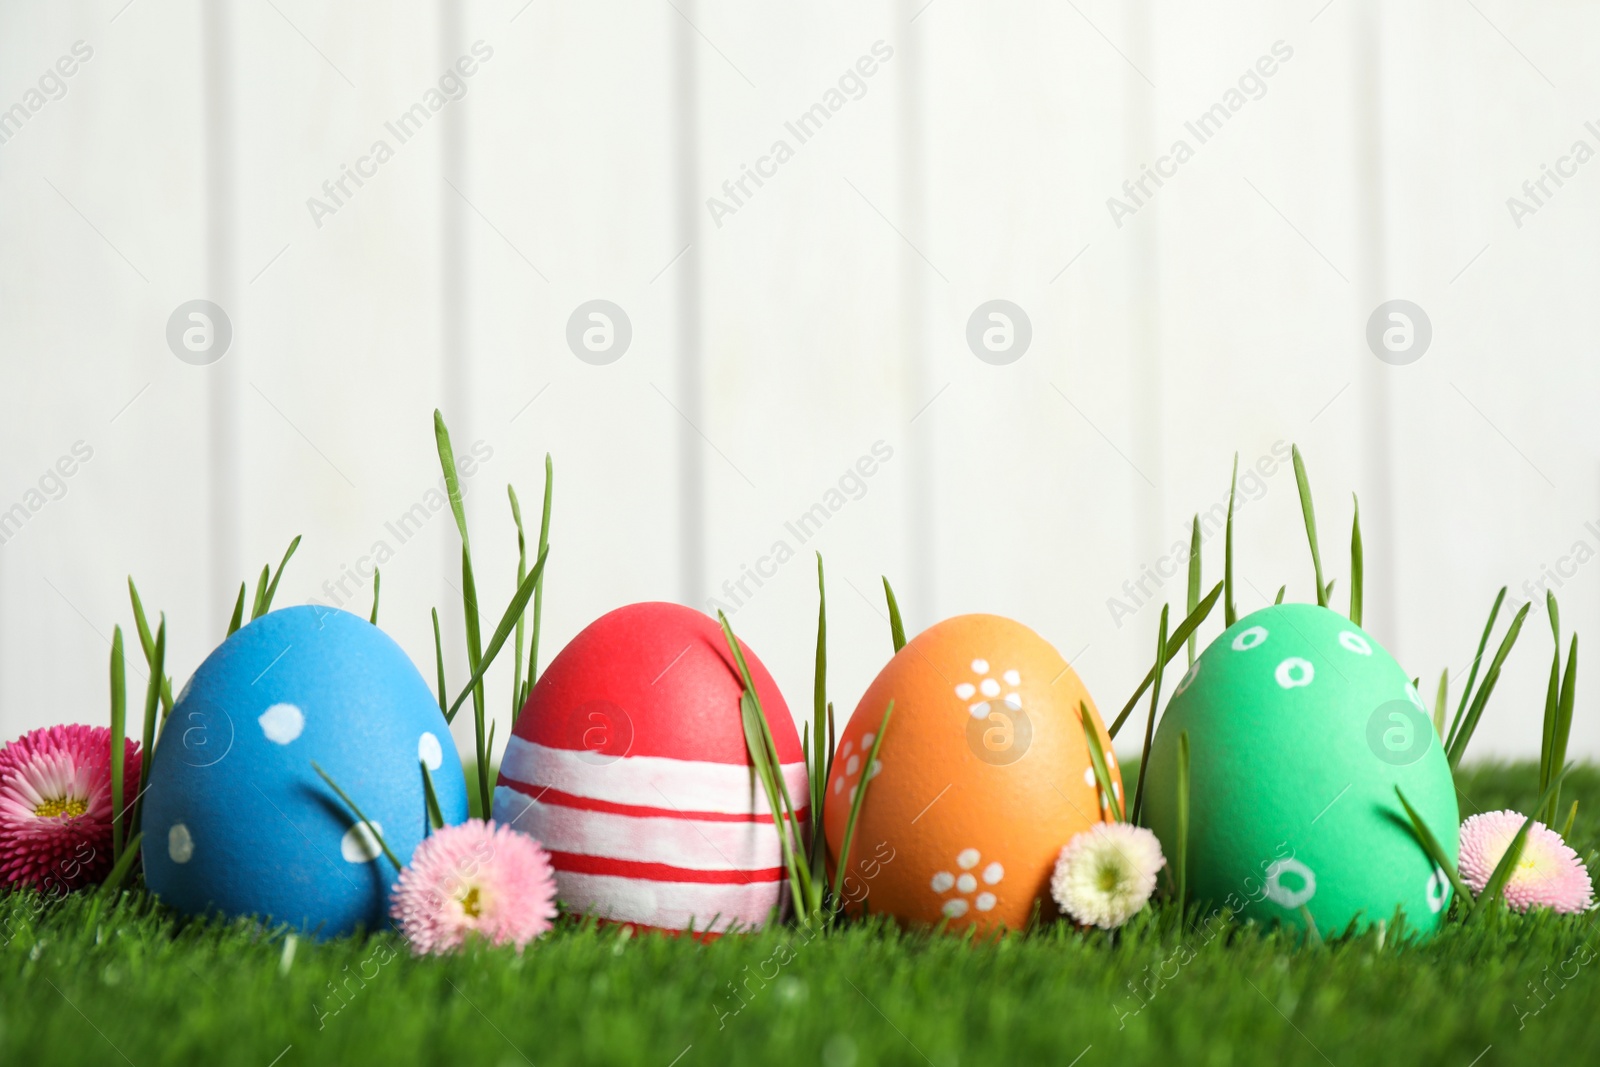 Photo of Colorful Easter eggs and daisy flowers in green grass against white background. Space for text